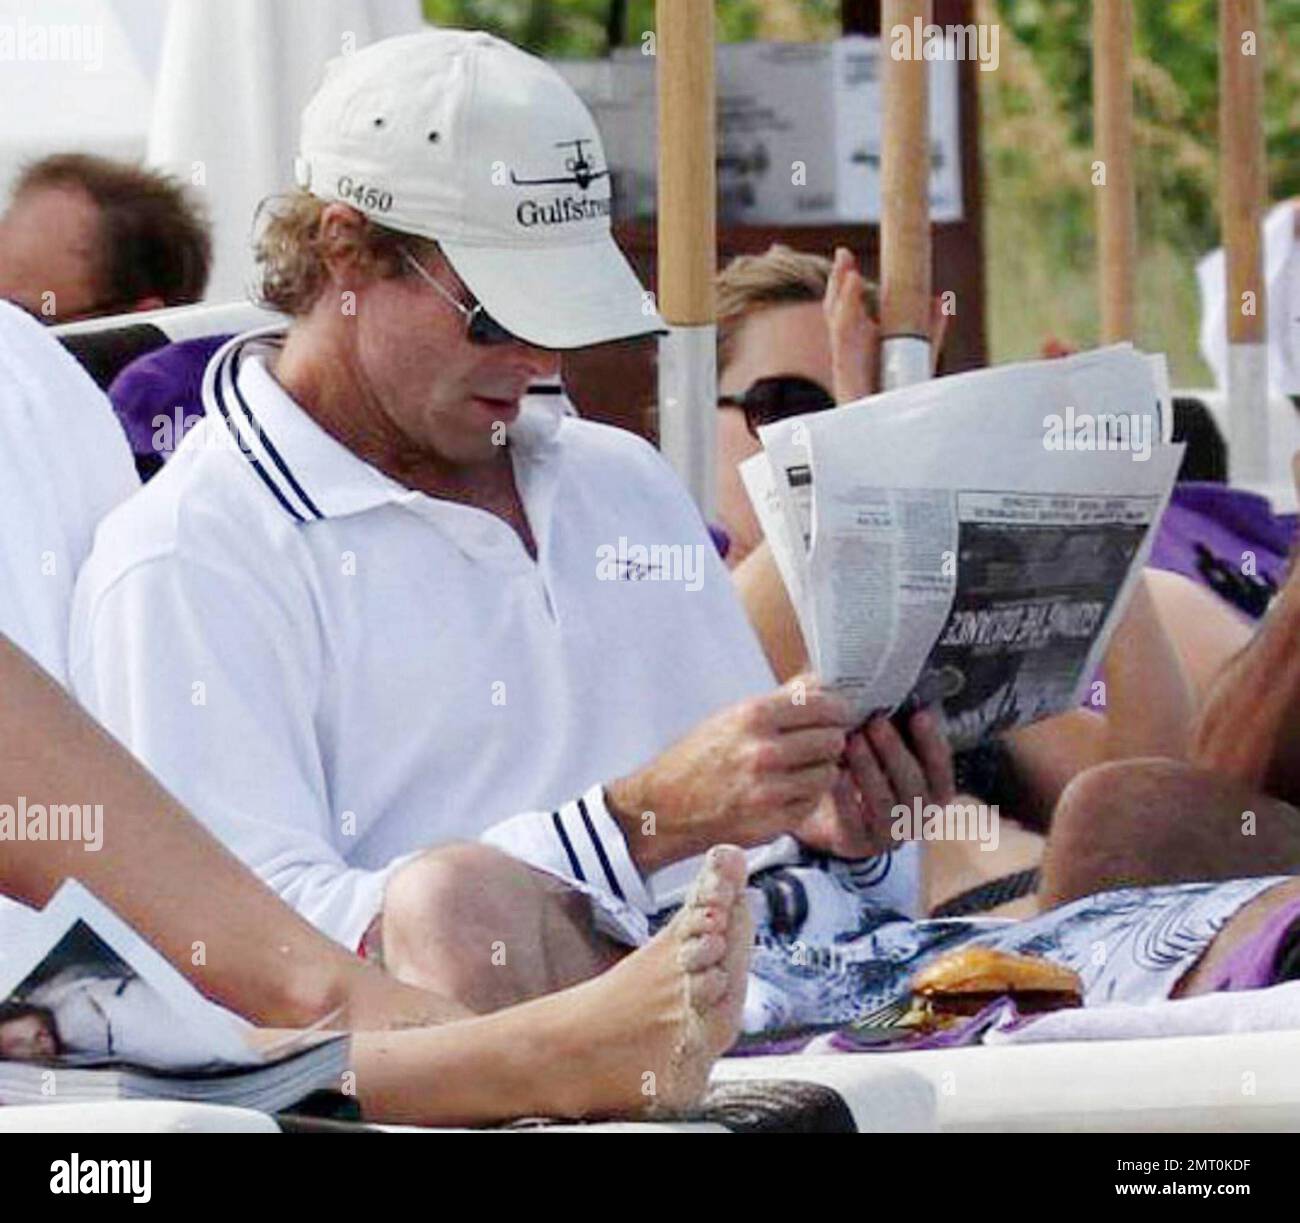 Blockbuster-making director Michael Bay hangs out at the beach with some friends over the Labor Day long weekend.  Bay, who is currently filming 'Transformers 3', showed off his trim physique as he put his shirt on before enjoying a newspaper followed by a burger and french fry lunch.  Bay has recently been in the news as he reportedly pledged a $50,000 reward to anyone who will identify a mystery woman who was video taped throwing live puppies in to a river, a video that can be seen on such websites as YouTube. Miami, FL. 09/04/10. Stock Photo